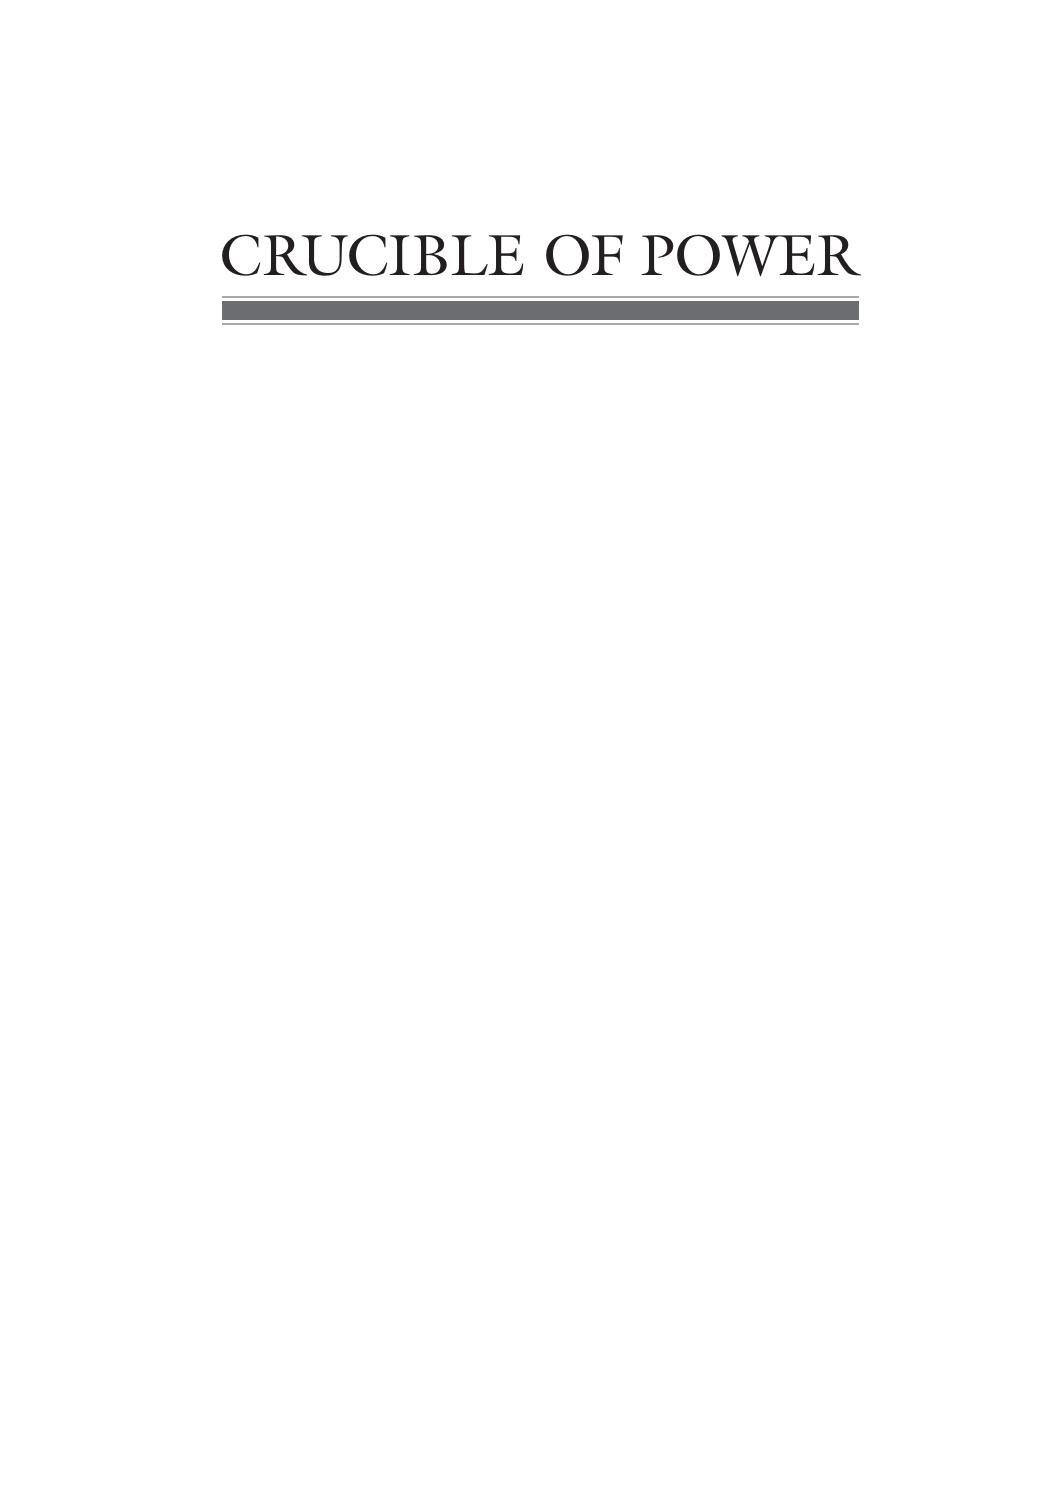 Crucible of Power : A History of American Foreign Relations To 1913 by Howard Jones